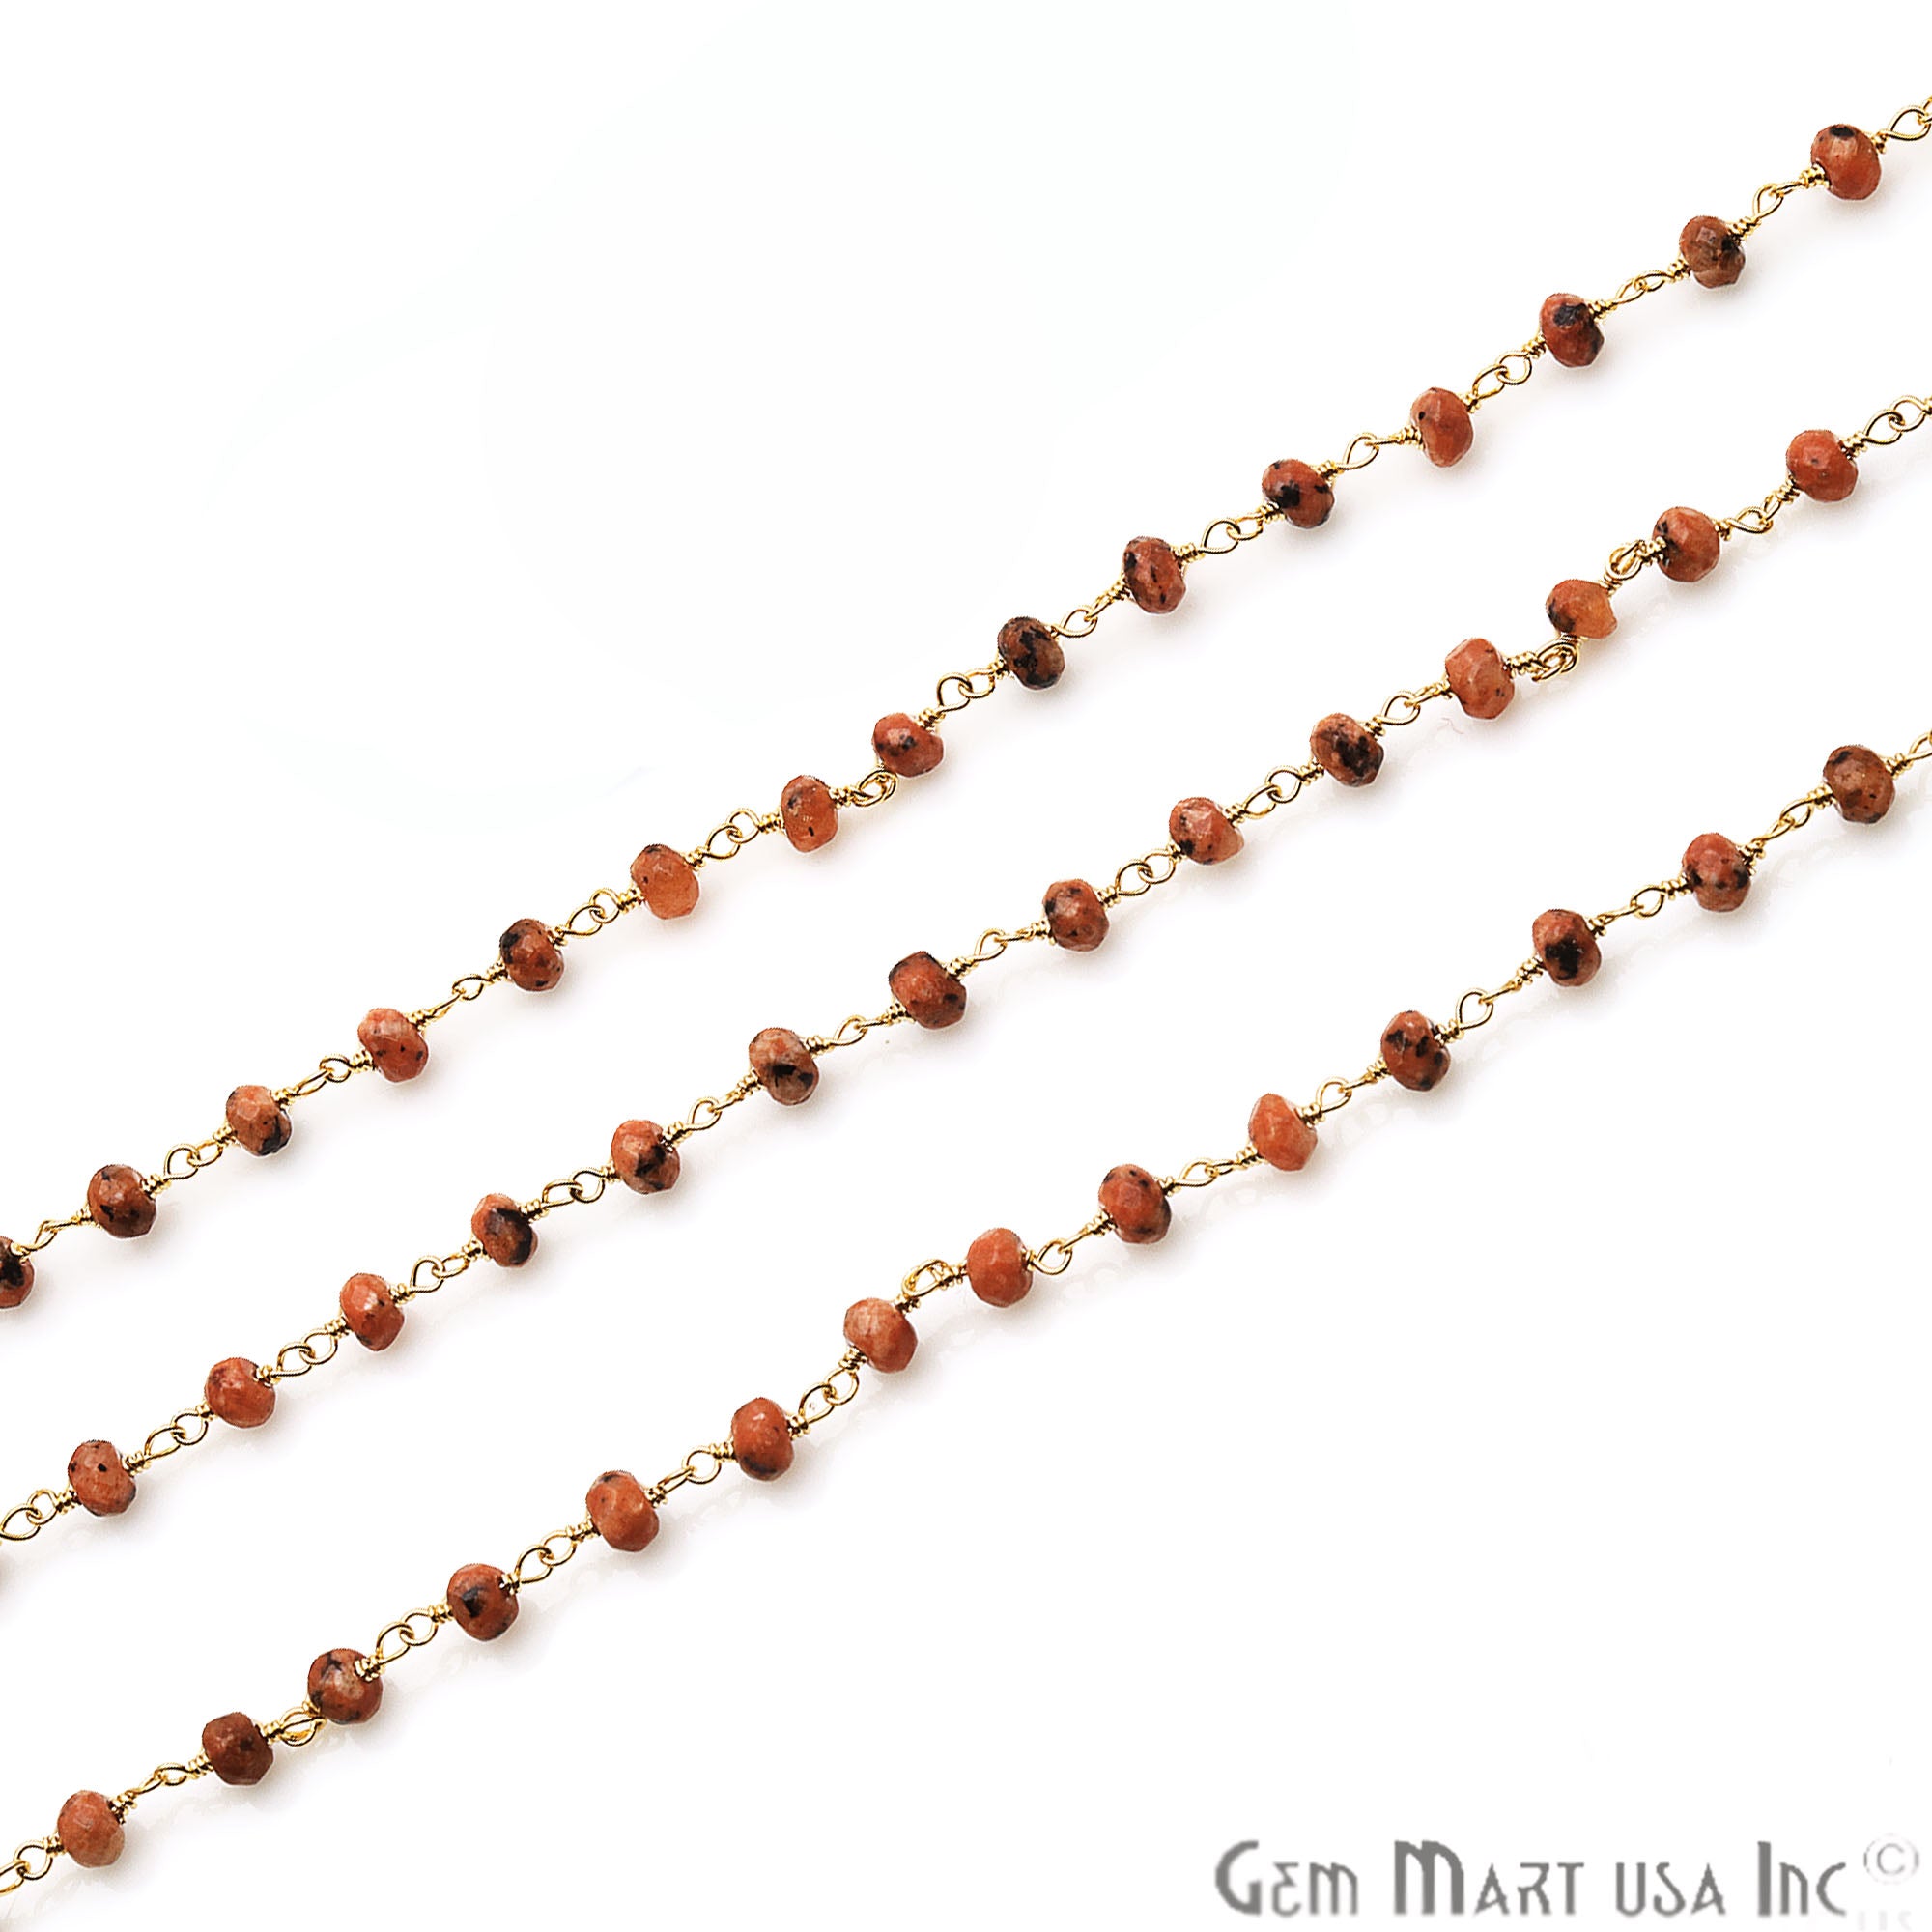 Fire Opal Jade Faceted Beads 4mm Gold Plated Wire Wrapped Rosary Chain - GemMartUSA